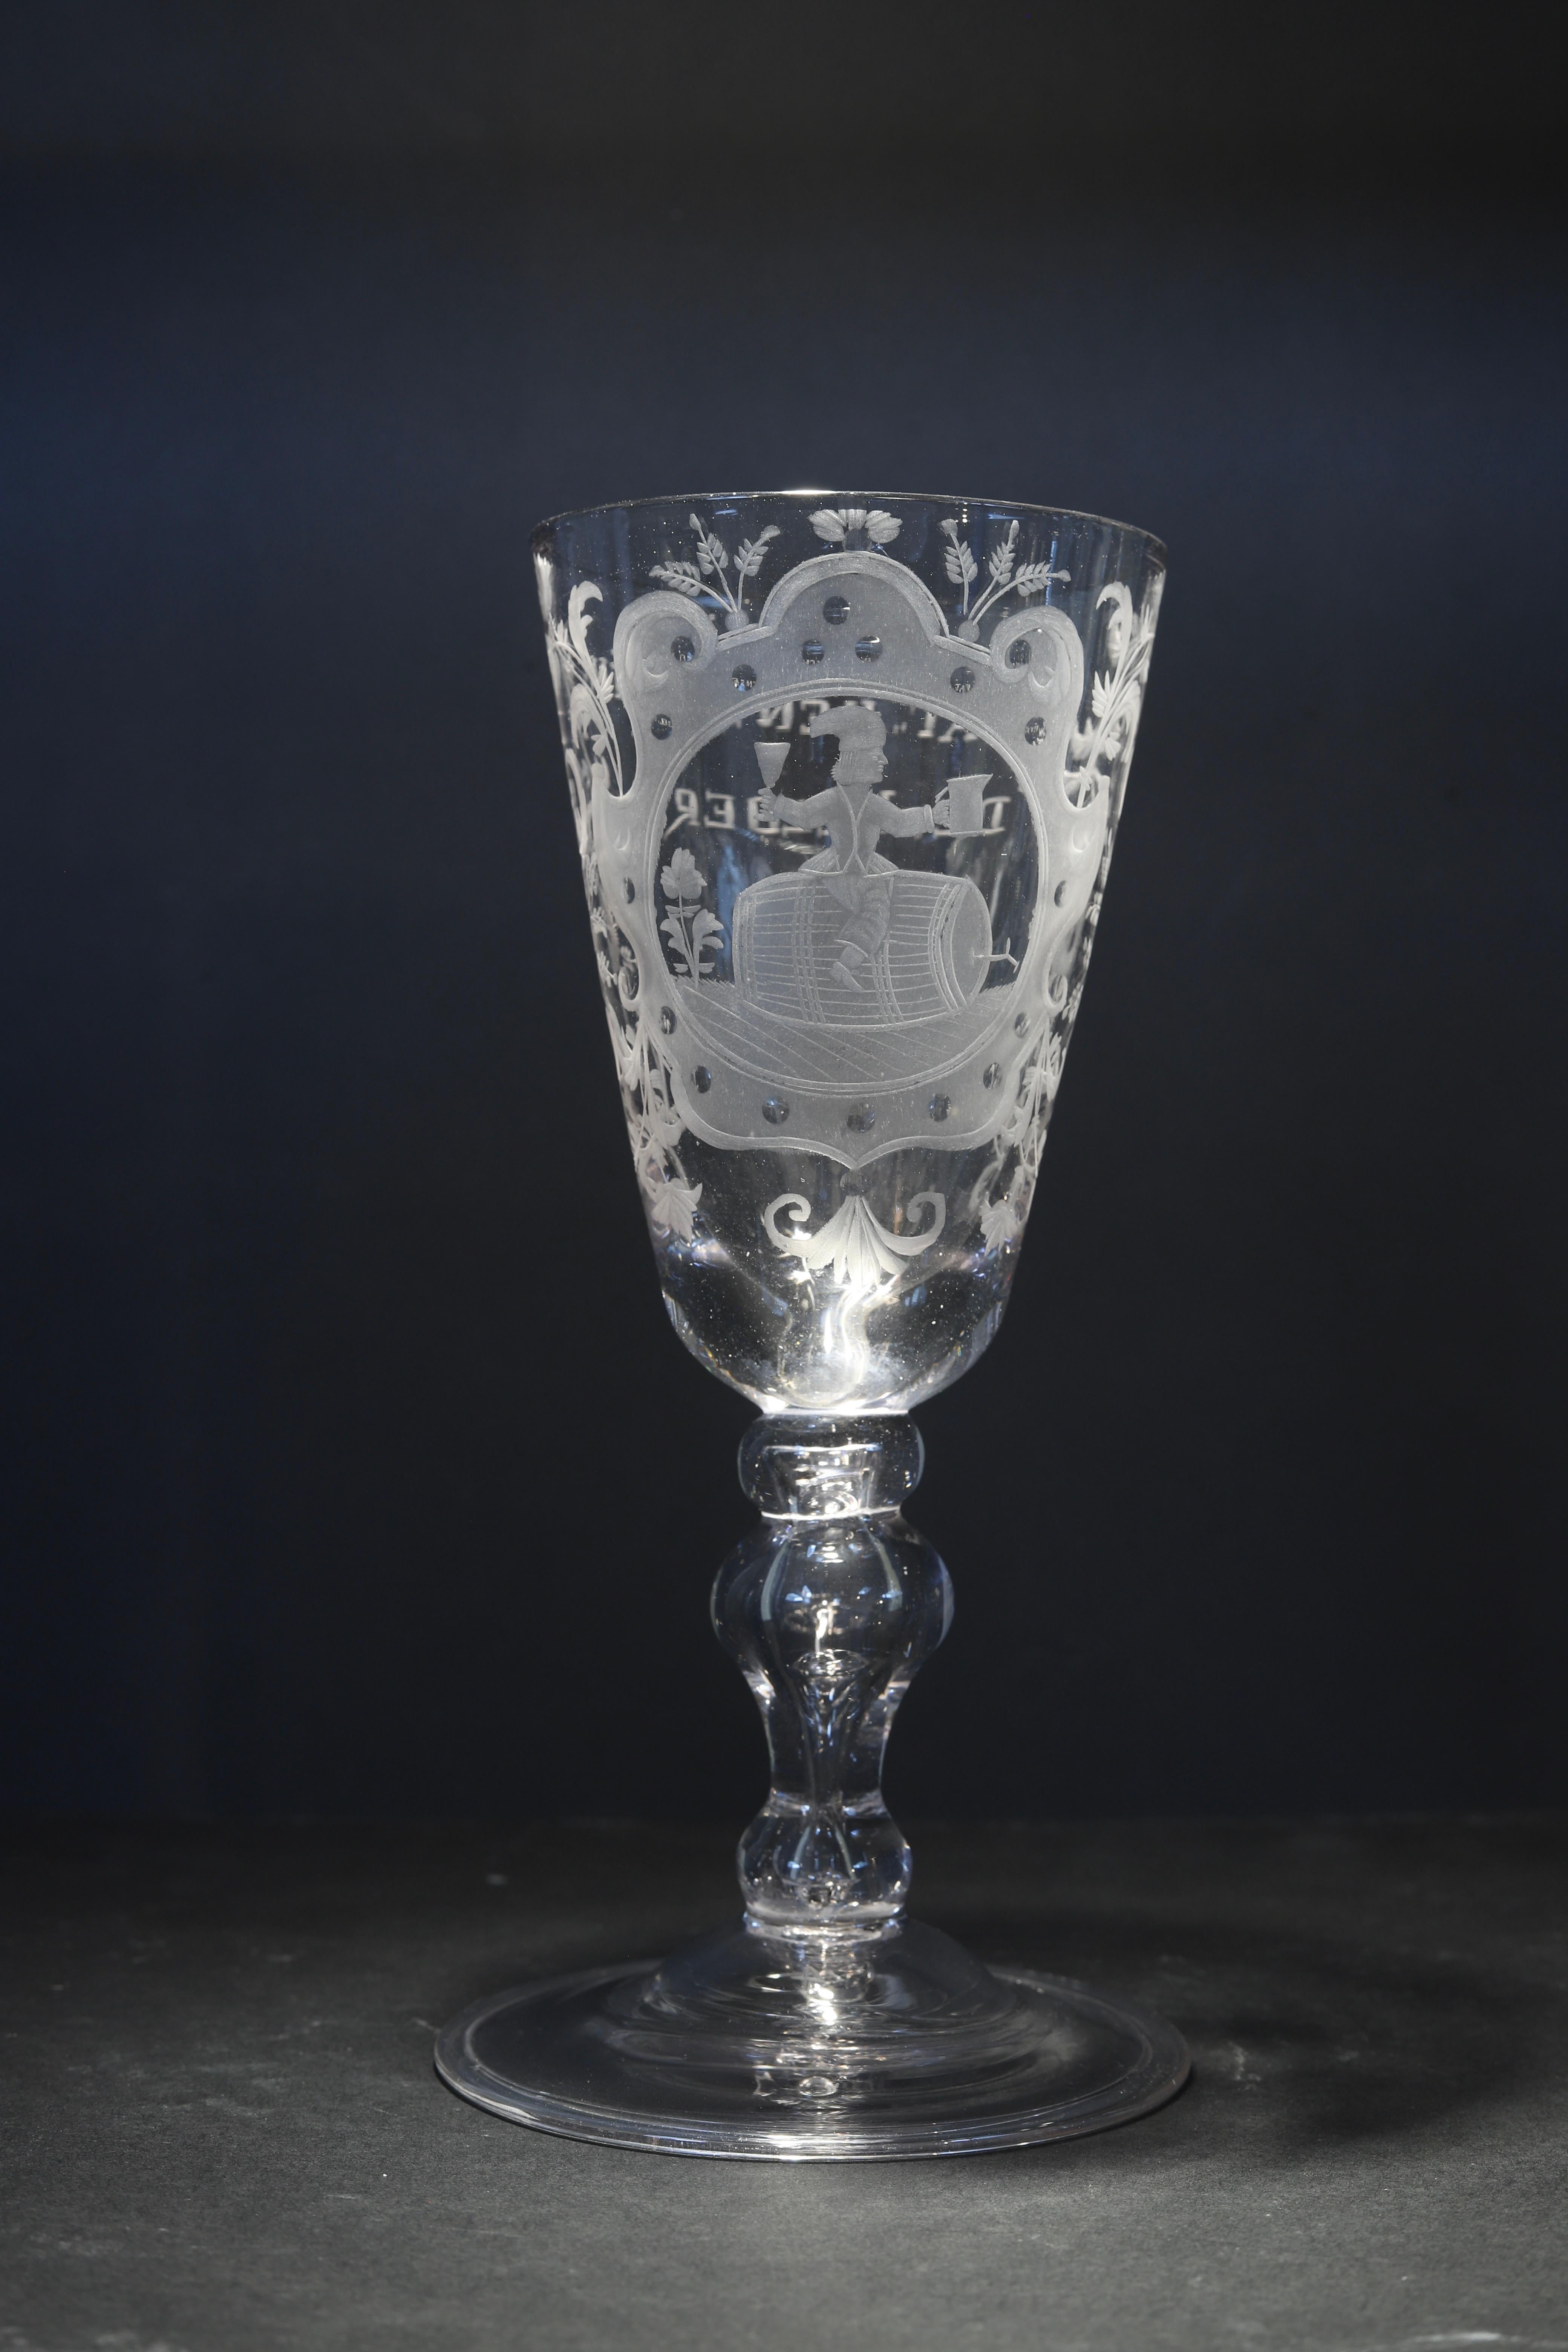 The Netherlands
Engraving: Dutch
Mid 18th century

A large Dutch engraved baluster wine glass, with a large funnel bowl with the decoration of a formal cartouche with a seated little guy on a wine barrel drinking and toasting, set on a thick stem